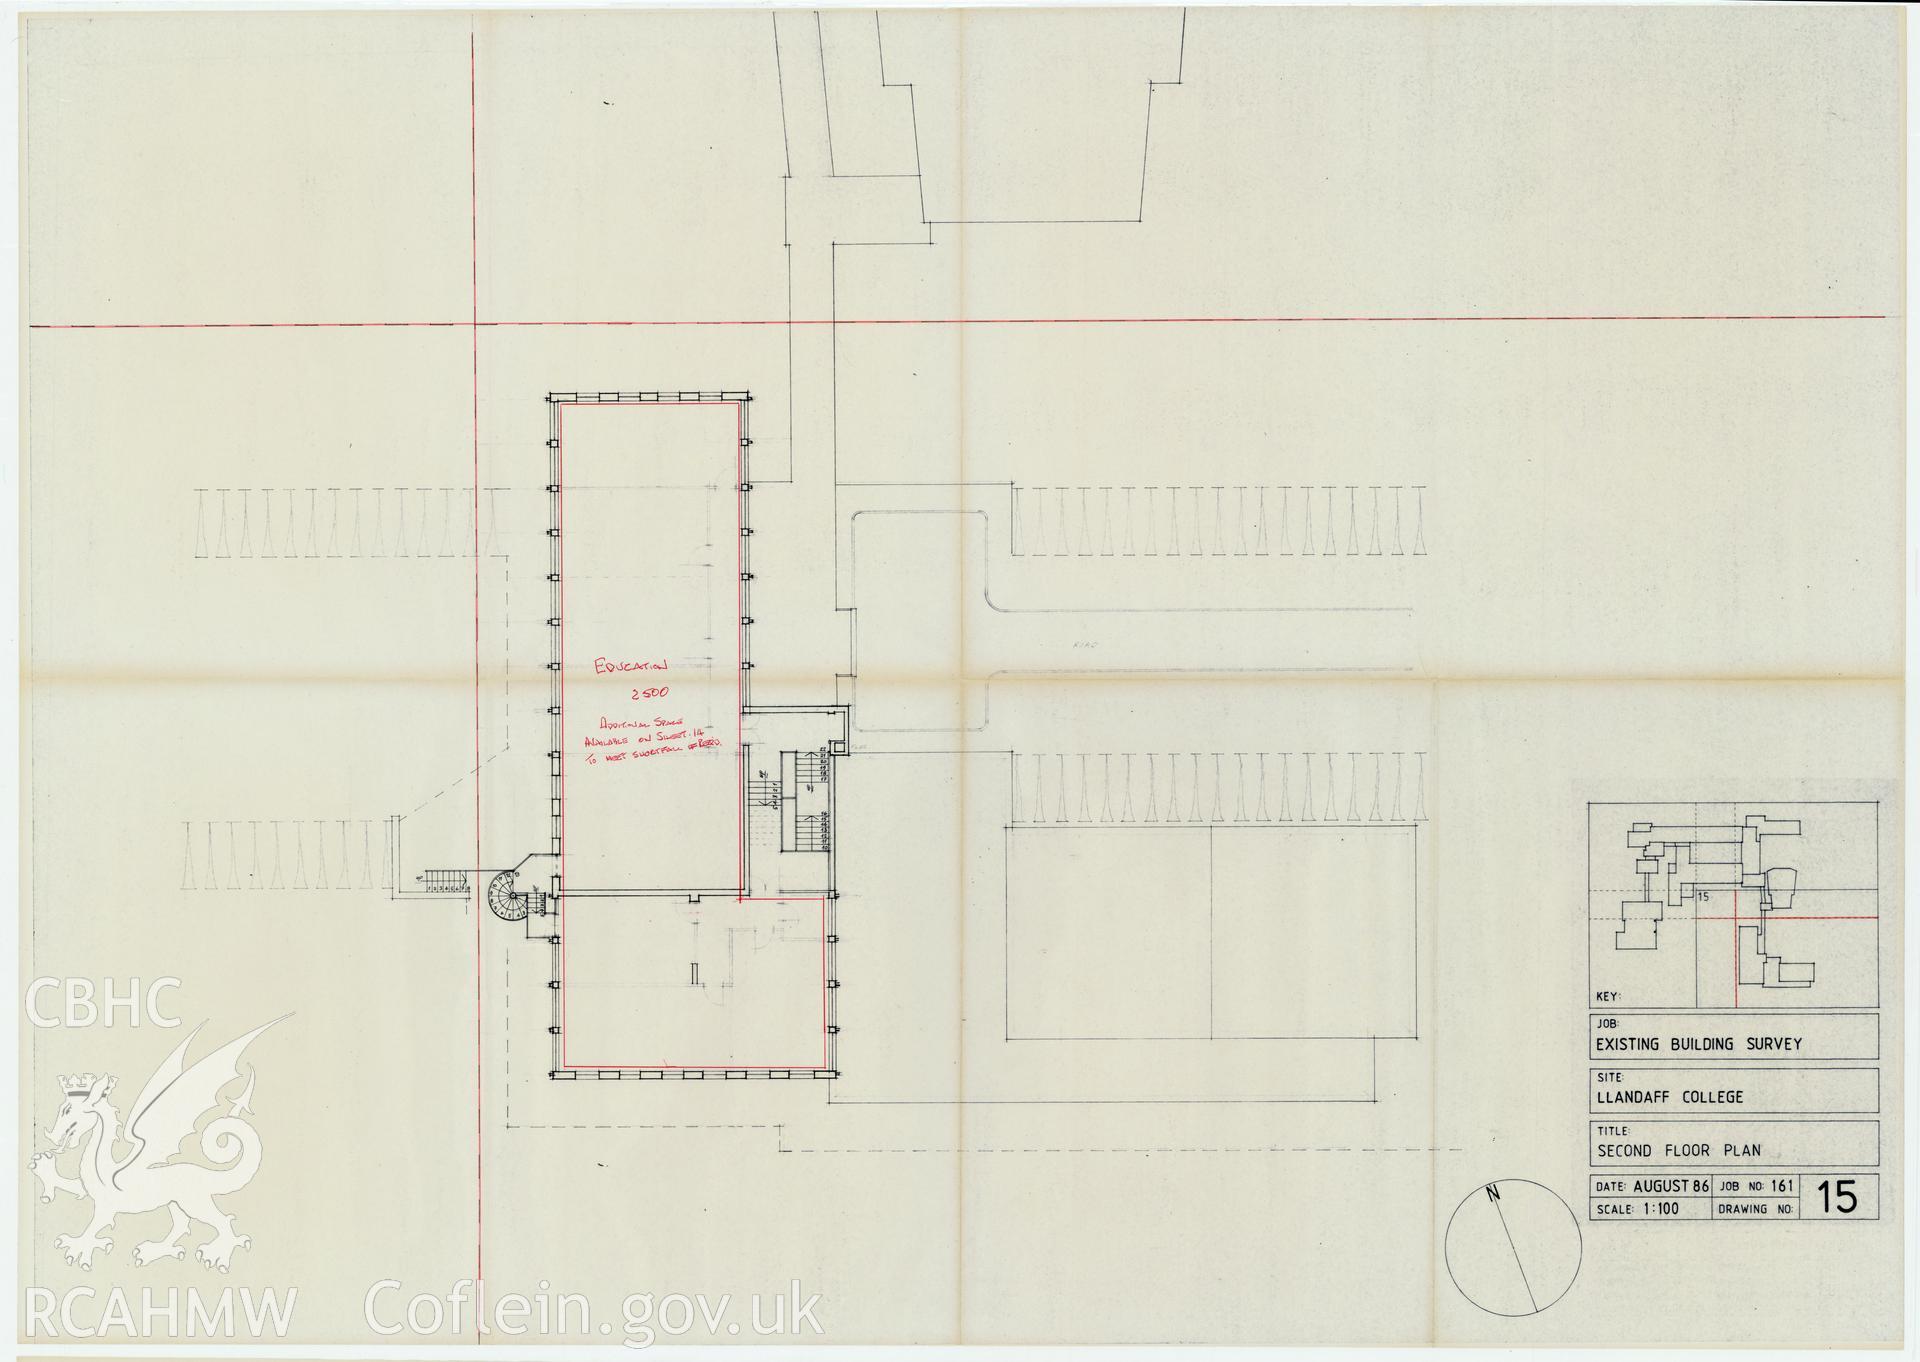 Plan of the second floor of Llandaff College, Cardiff. The existing building survey, August 1986, No 15.